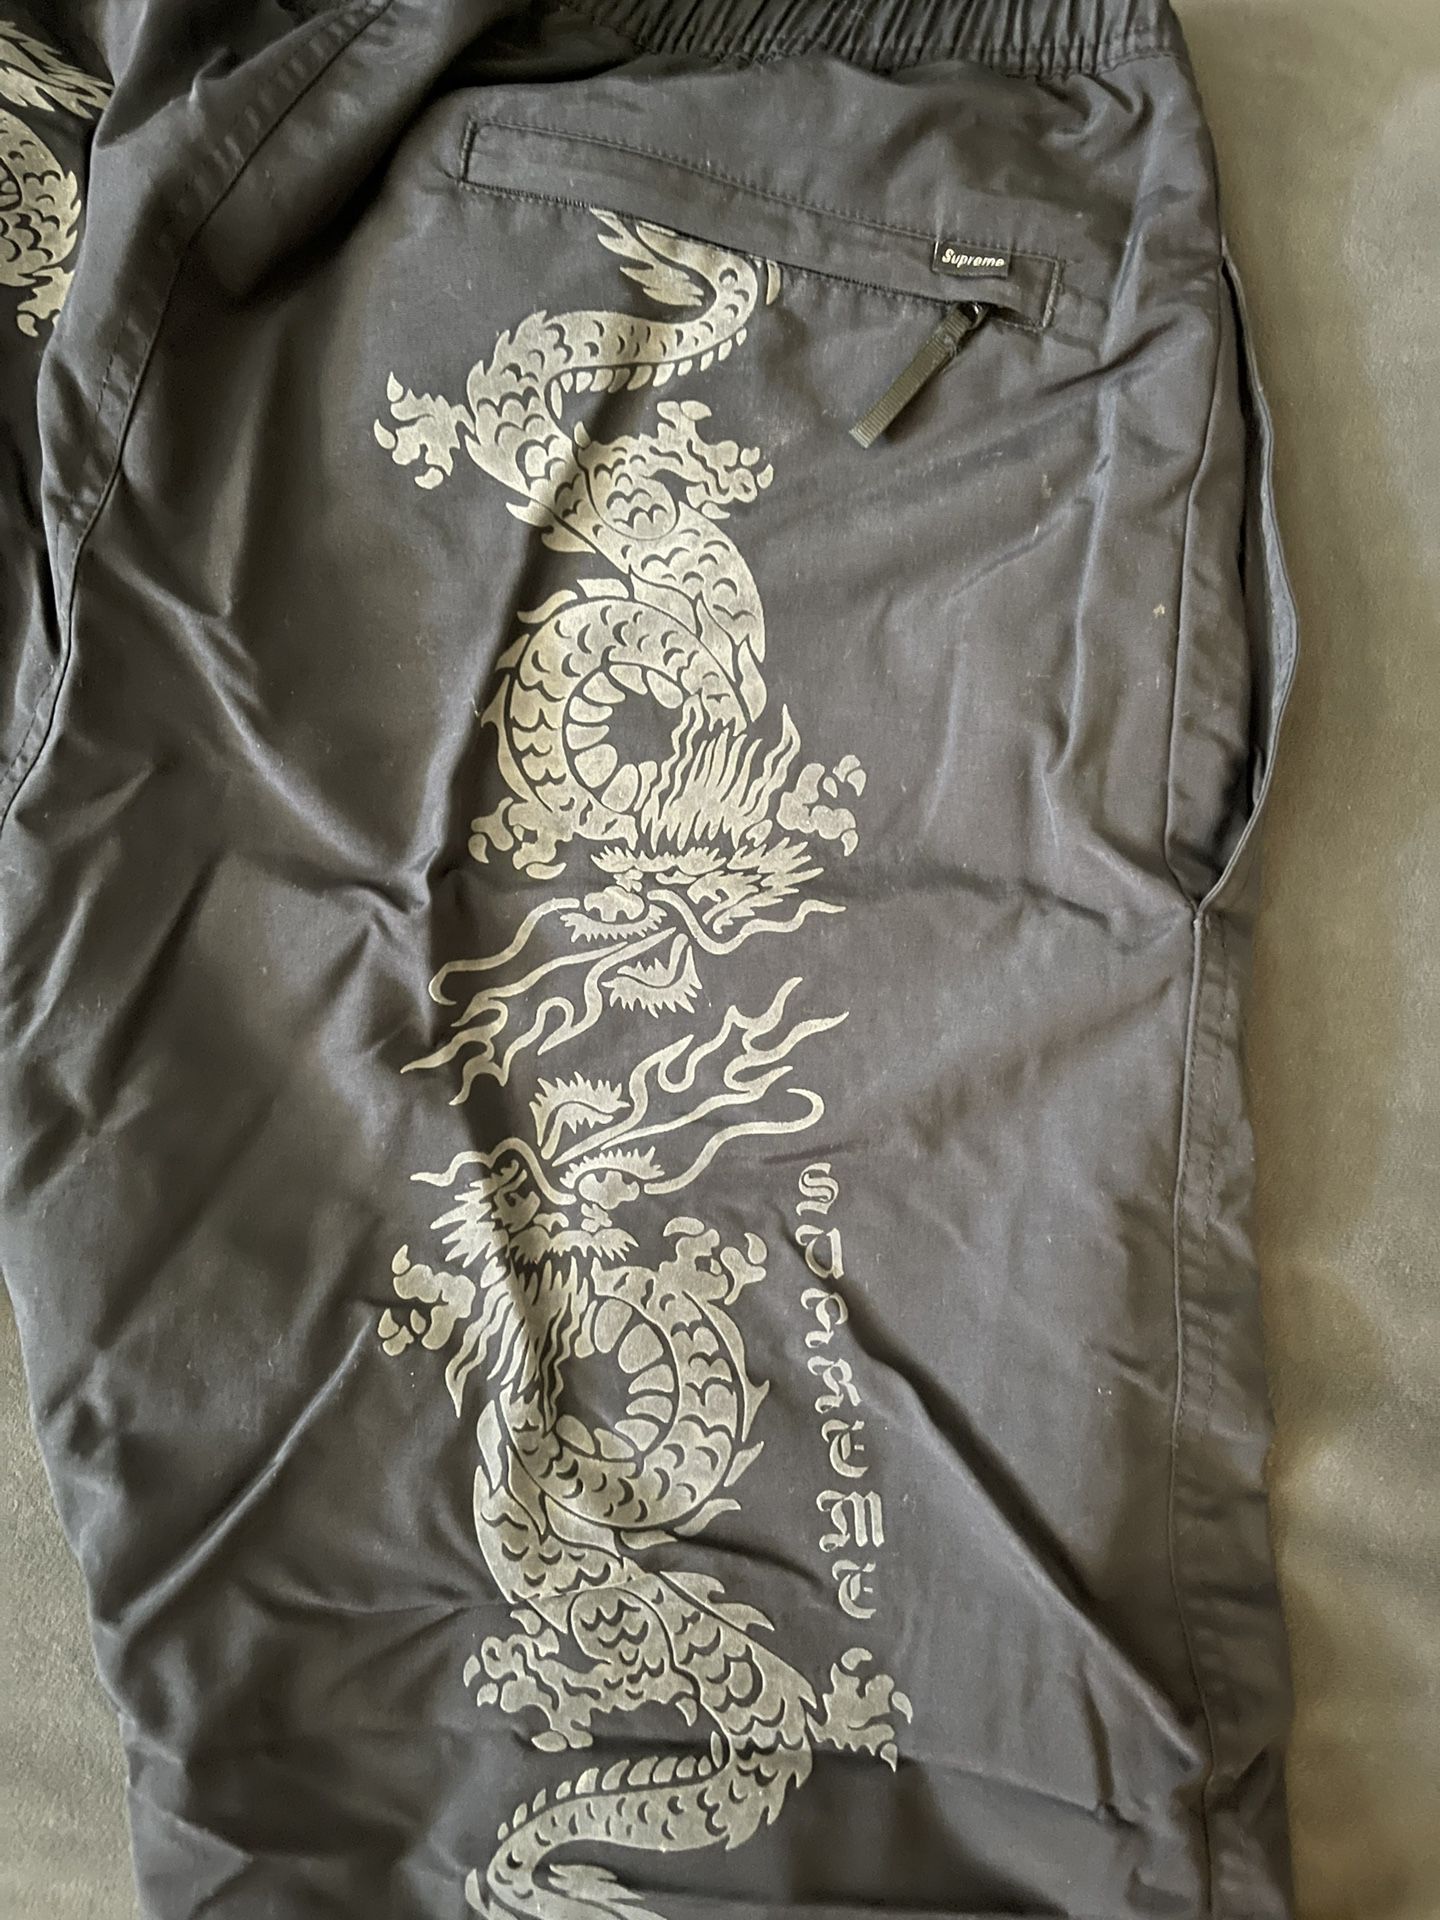 Supreme Dragon Print Sweats Size Small 60$ Or Best Offer